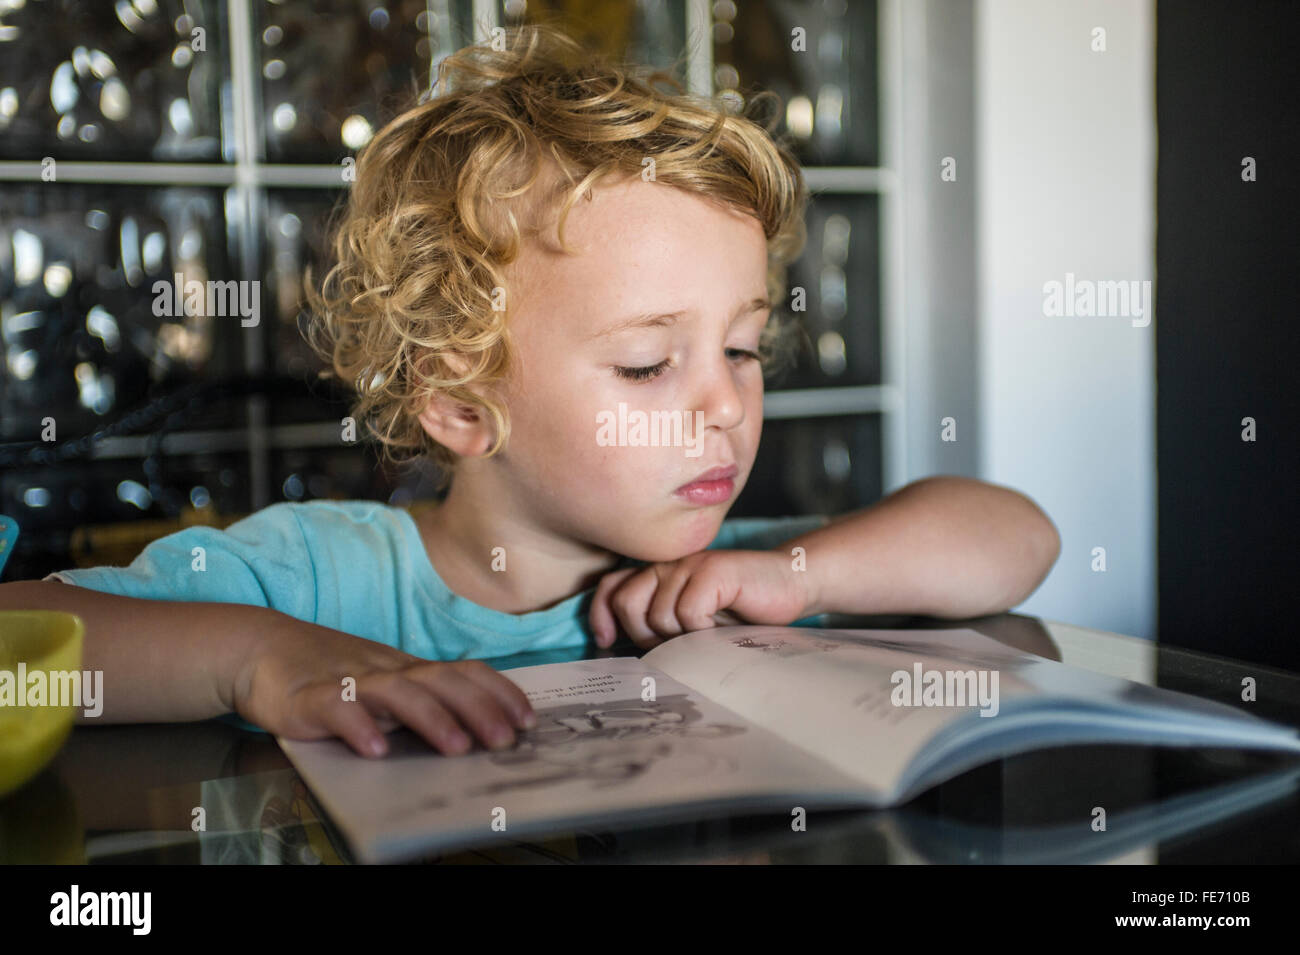 A little boy (age 3-and-a-half years) reads a book at a table in his home. Stock Photo